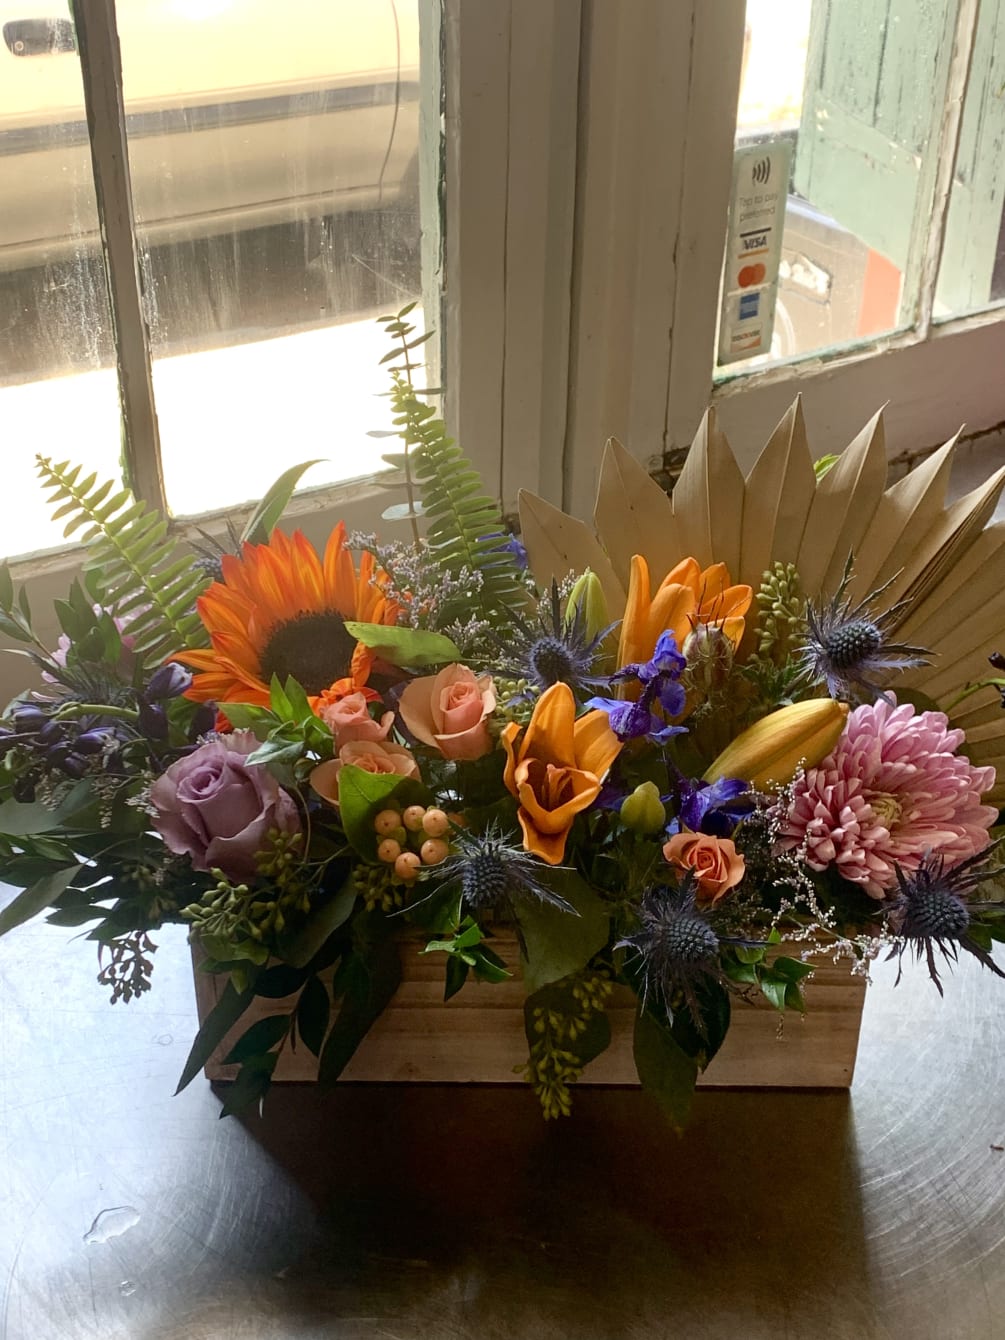 Natural collection of blooms in a wooden box, featuring dried palmetto leaves